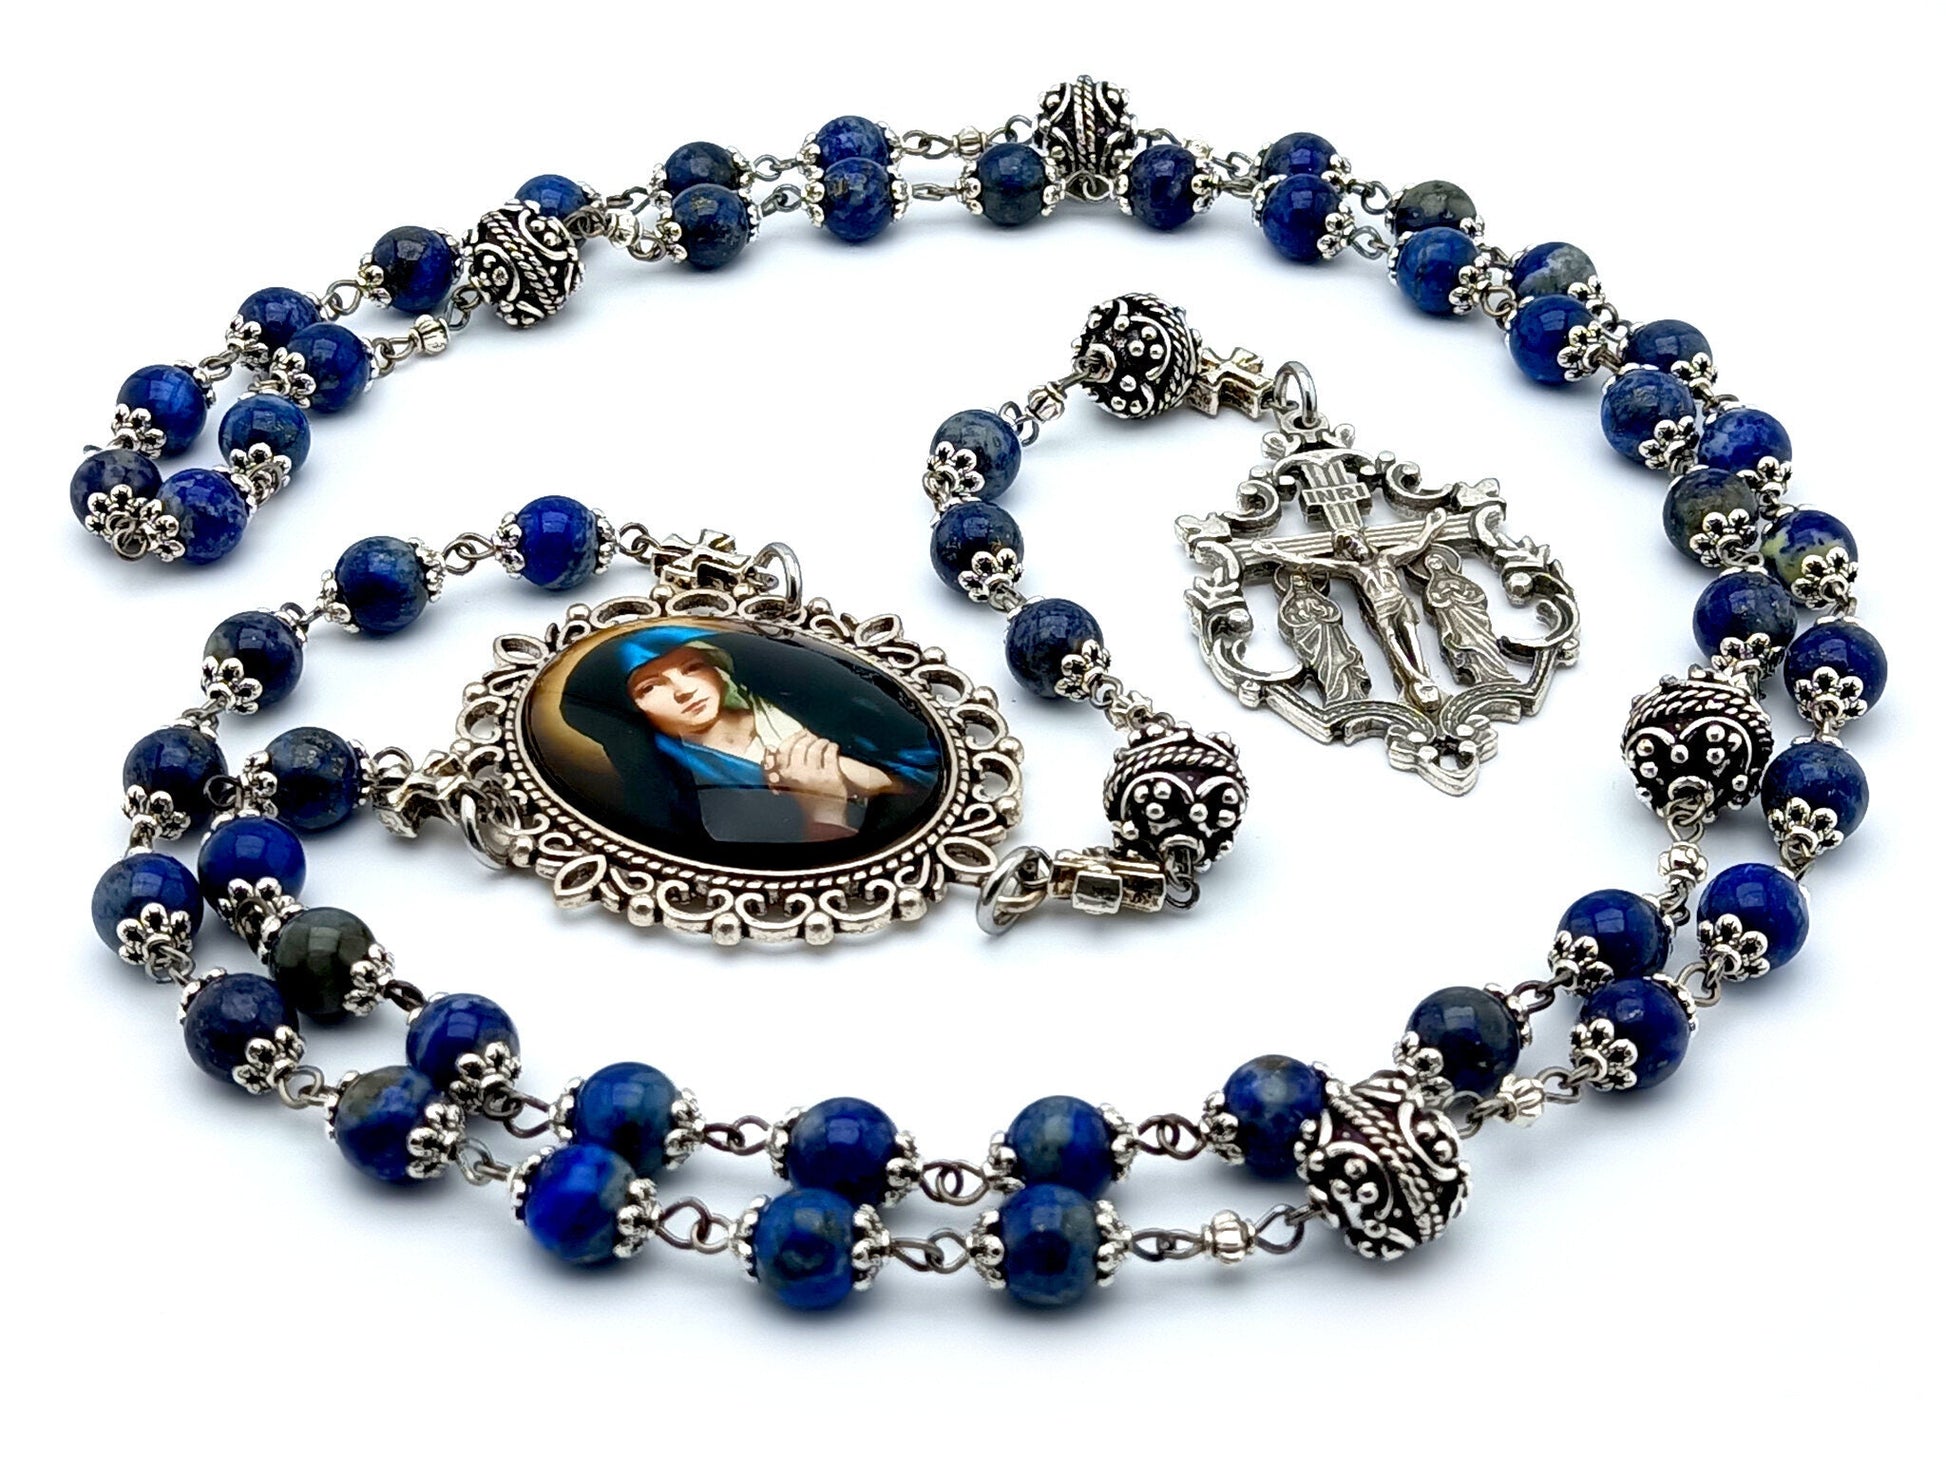 Our Lady of Sorrows unique rosary beads with lapis lazuli and silver beads, two Marys crucifix and large picture centre medal.